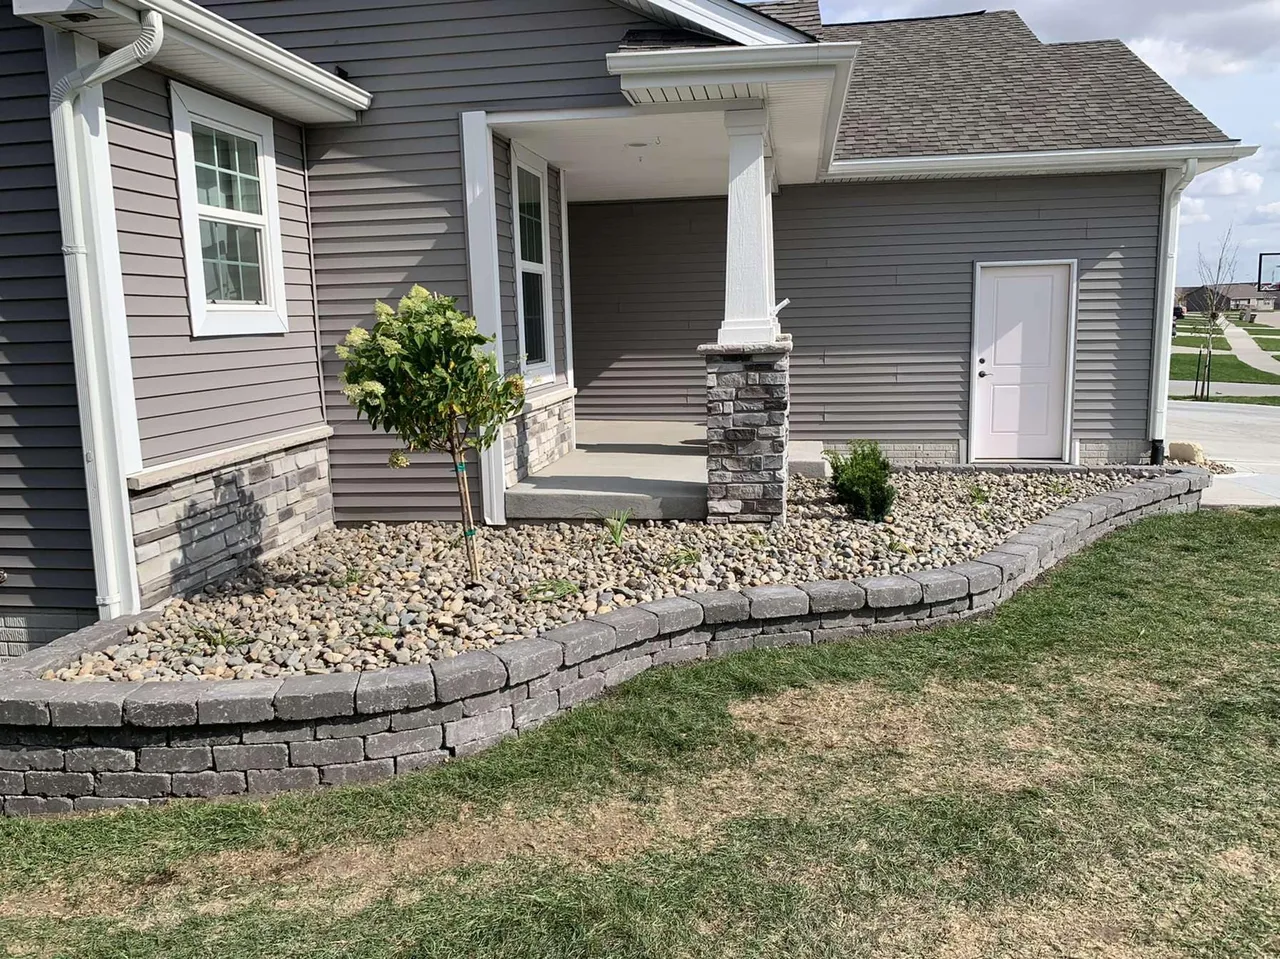 A house with a stone wall and landscaping.